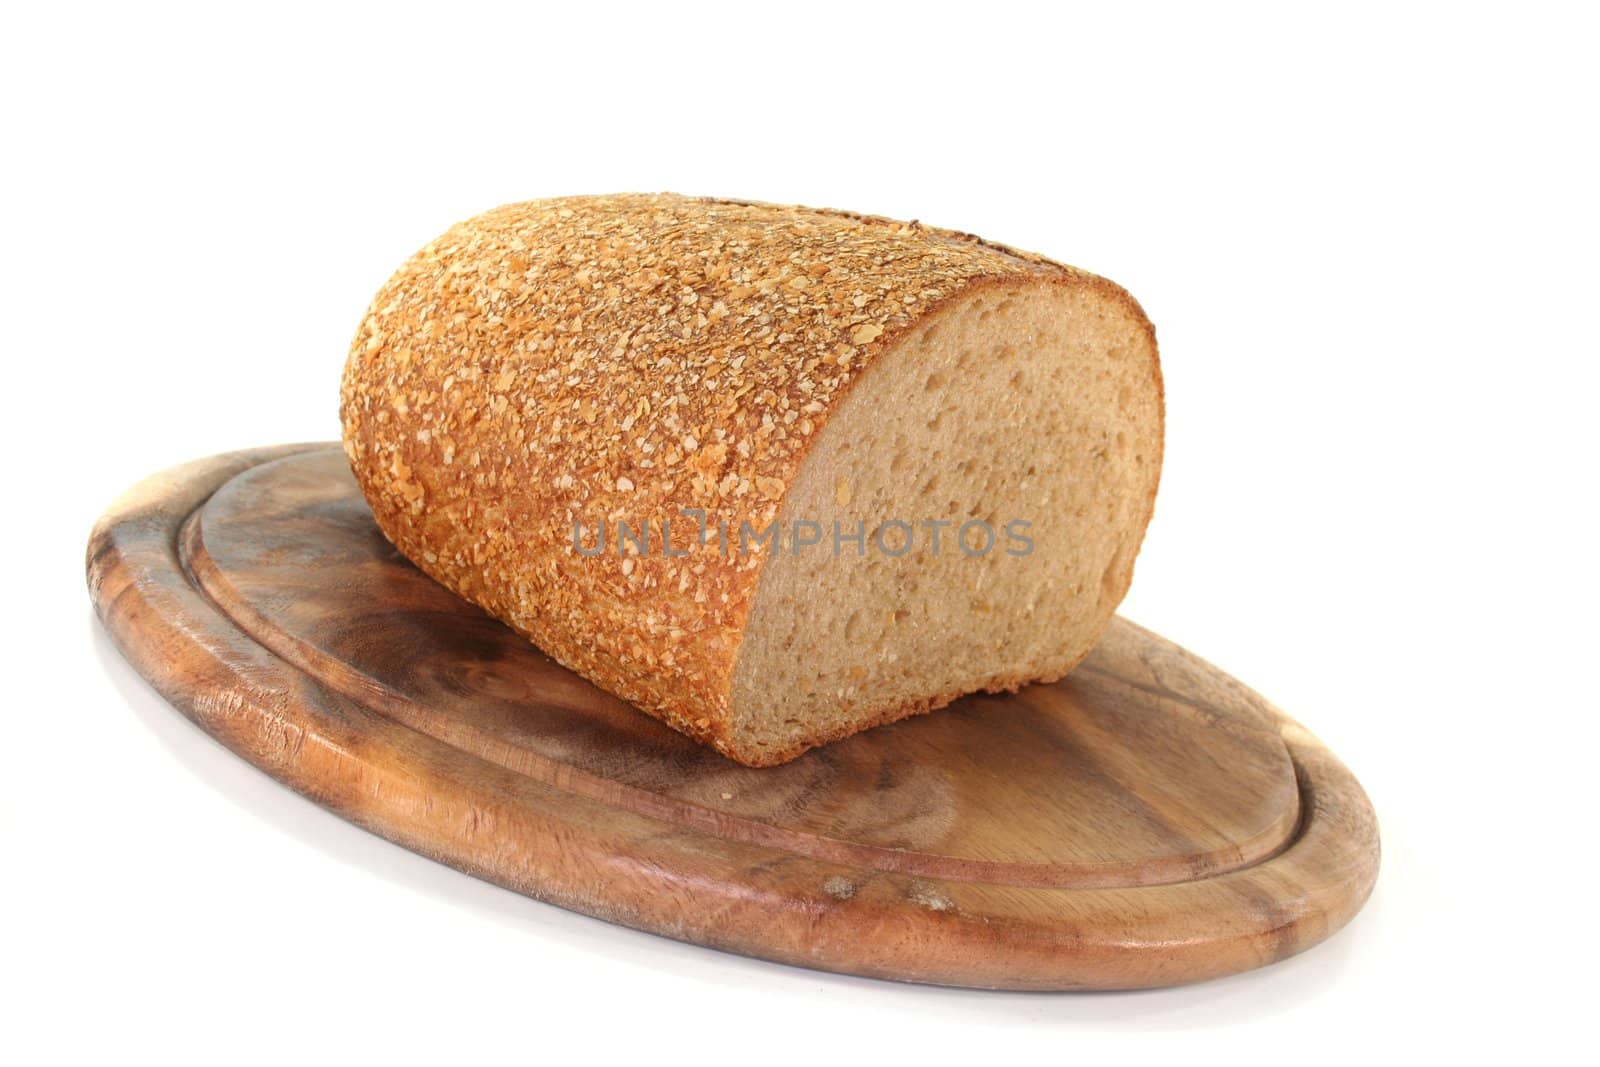 Bread on a wooden board by discovery